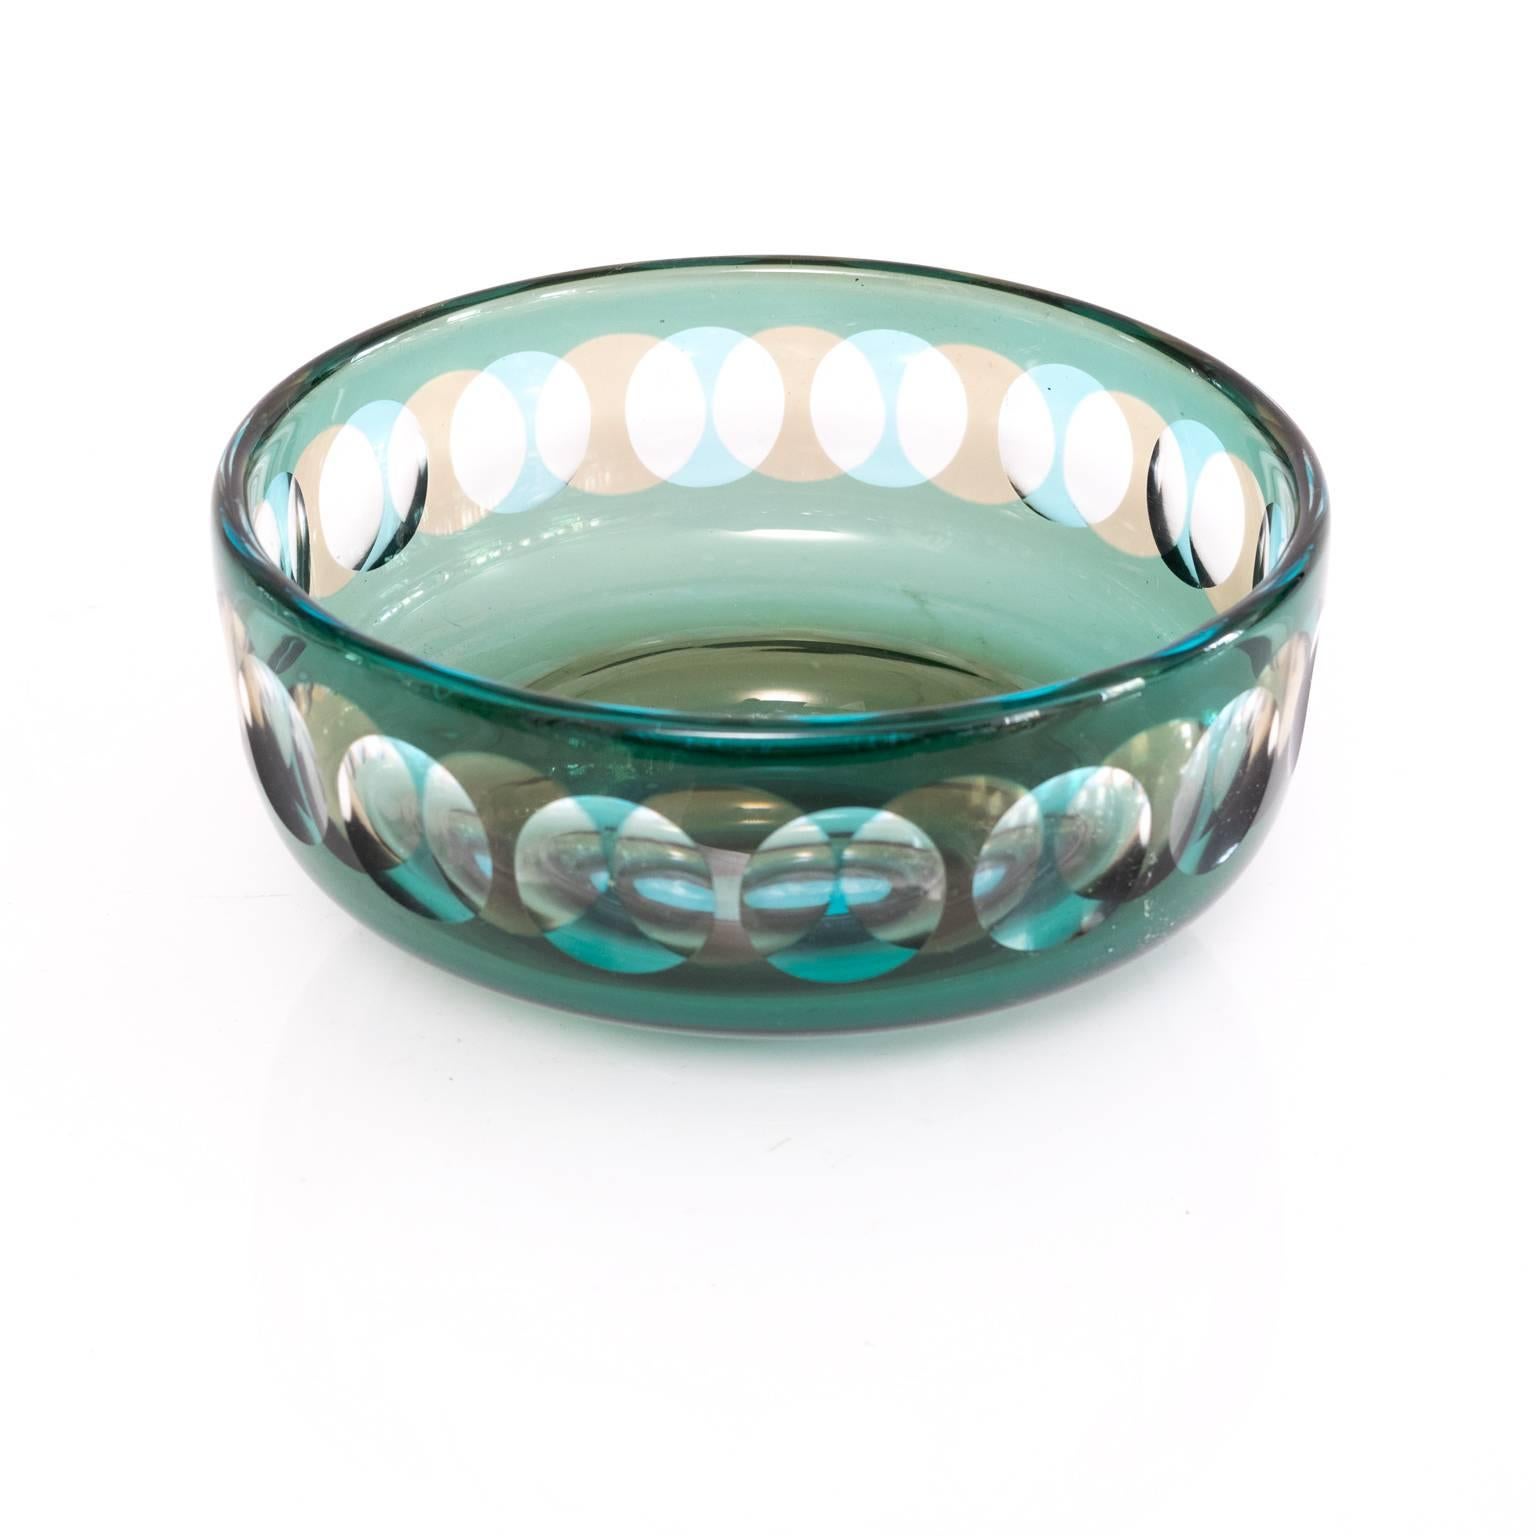 Mid-Century Modern layered colored glass bowl designed by One Sandeberg for Kosta, Sweden, circa 1960.

Measures: Diameter 7“, height 3.25